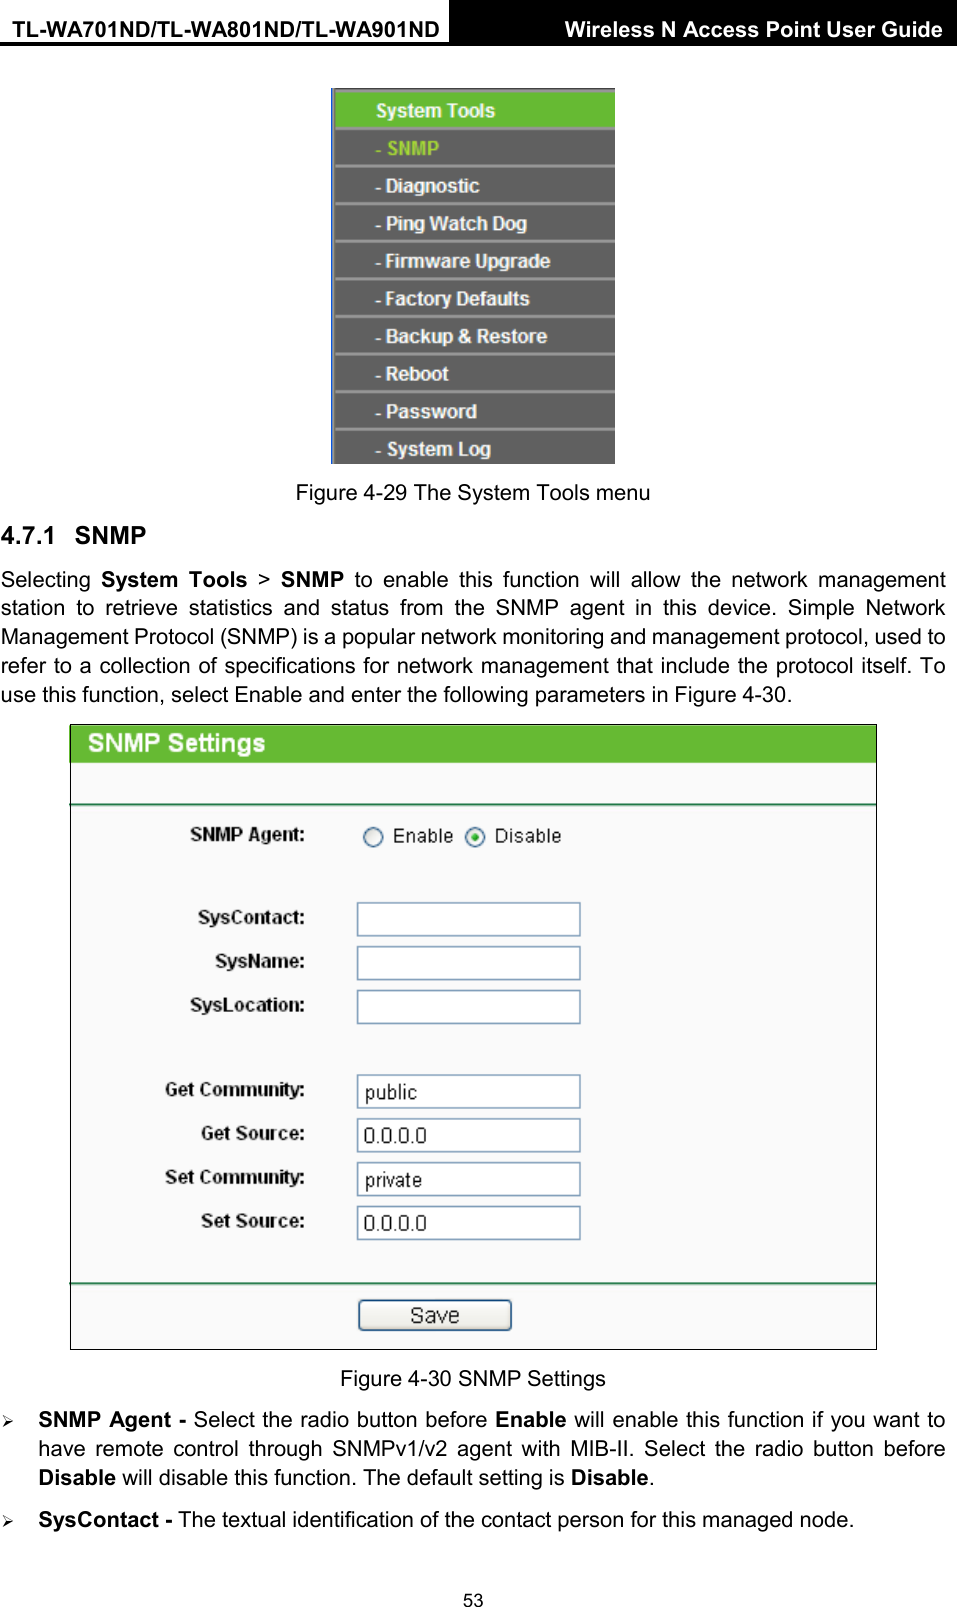 TL-WA701ND/TL-WA801ND/TL-WA901ND Wireless N Access Point User Guide  53  Figure 4-29 The System Tools menu 4.7.1 SNMP Selecting  System Tools &gt; SNMP to enable this function will allow the network management station to retrieve statistics and status from the SNMP agent in this device. Simple Network Management Protocol (SNMP) is a popular network monitoring and management protocol, used to refer to a collection of specifications for network management that include the protocol itself. To use this function, select Enable and enter the following parameters in Figure 4-30.  Figure 4-30 SNMP Settings  SNMP Agent - Select the radio button before Enable will enable this function if you want to have remote control through SNMPv1/v2 agent with MIB-II.  Select the radio button before Disable will disable this function. The default setting is Disable.  SysContact - The textual identification of the contact person for this managed node. 